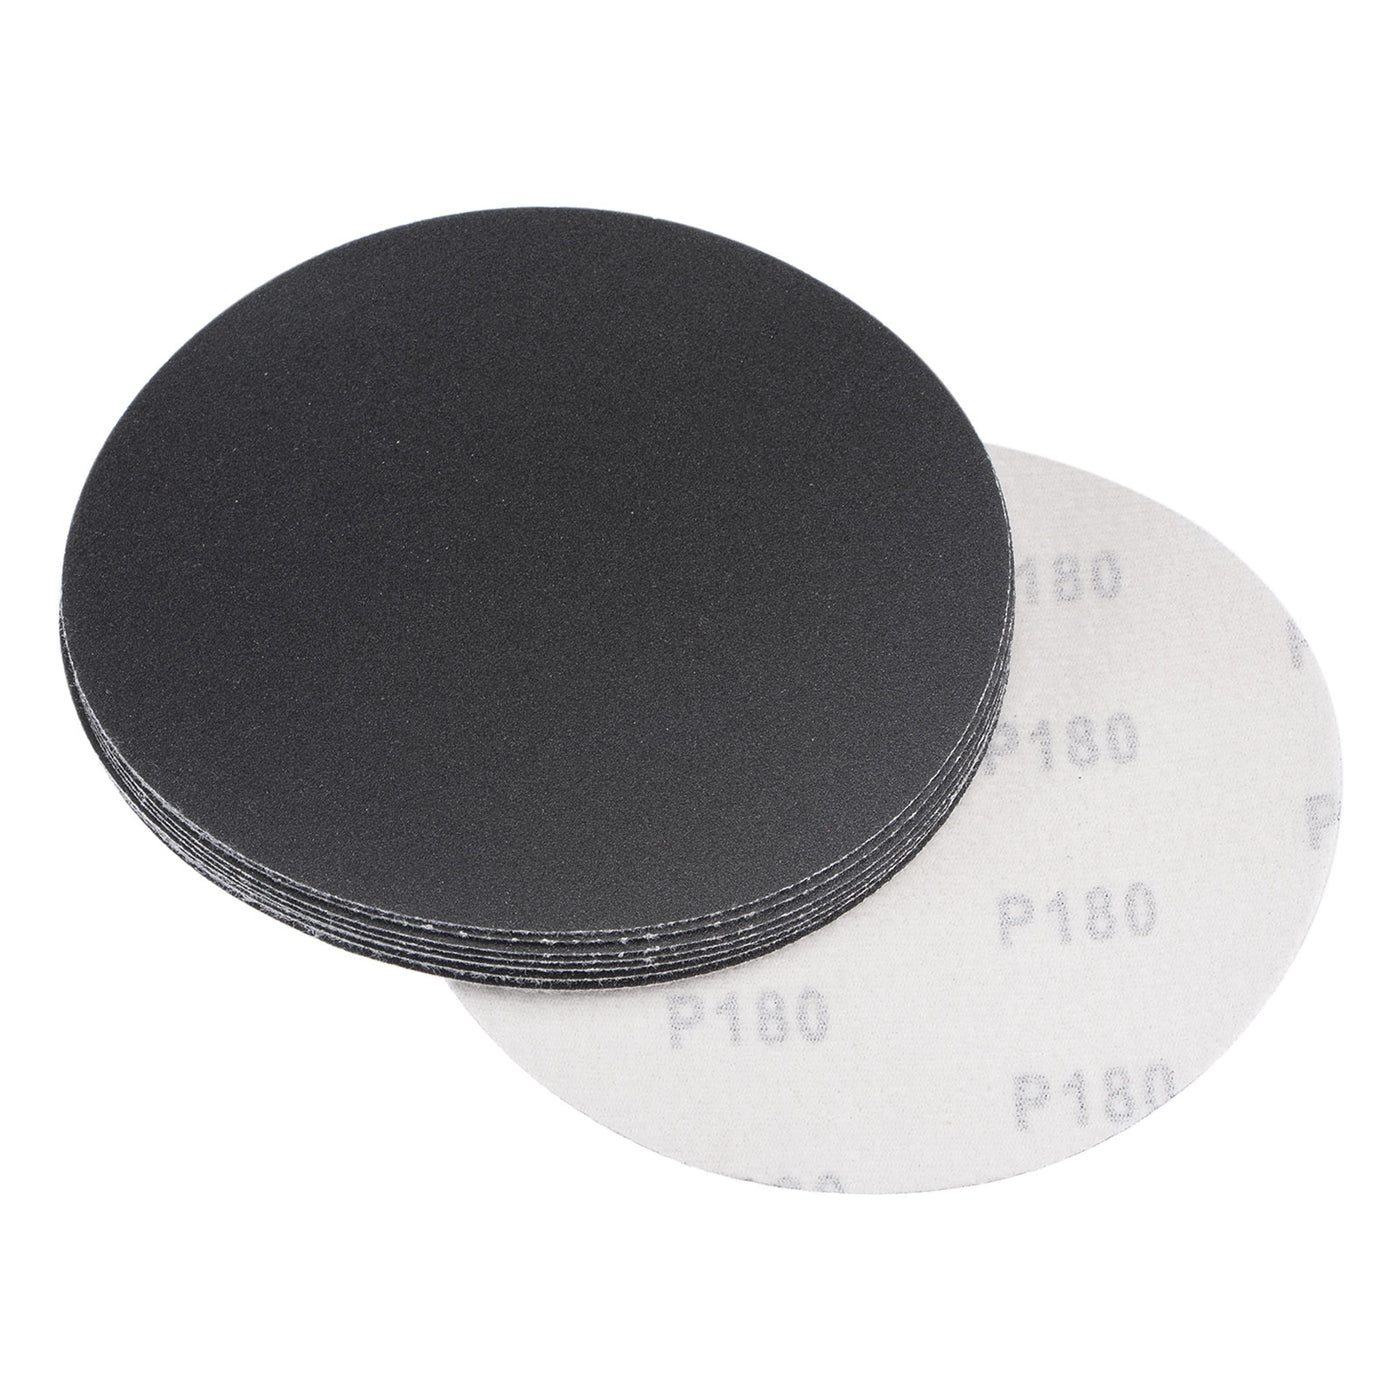 Uxcell Uxcell 6 Inch Sanding Disc 180Grit Hook and Loop Silicon Carbide C-Weight Backing 10Pcs